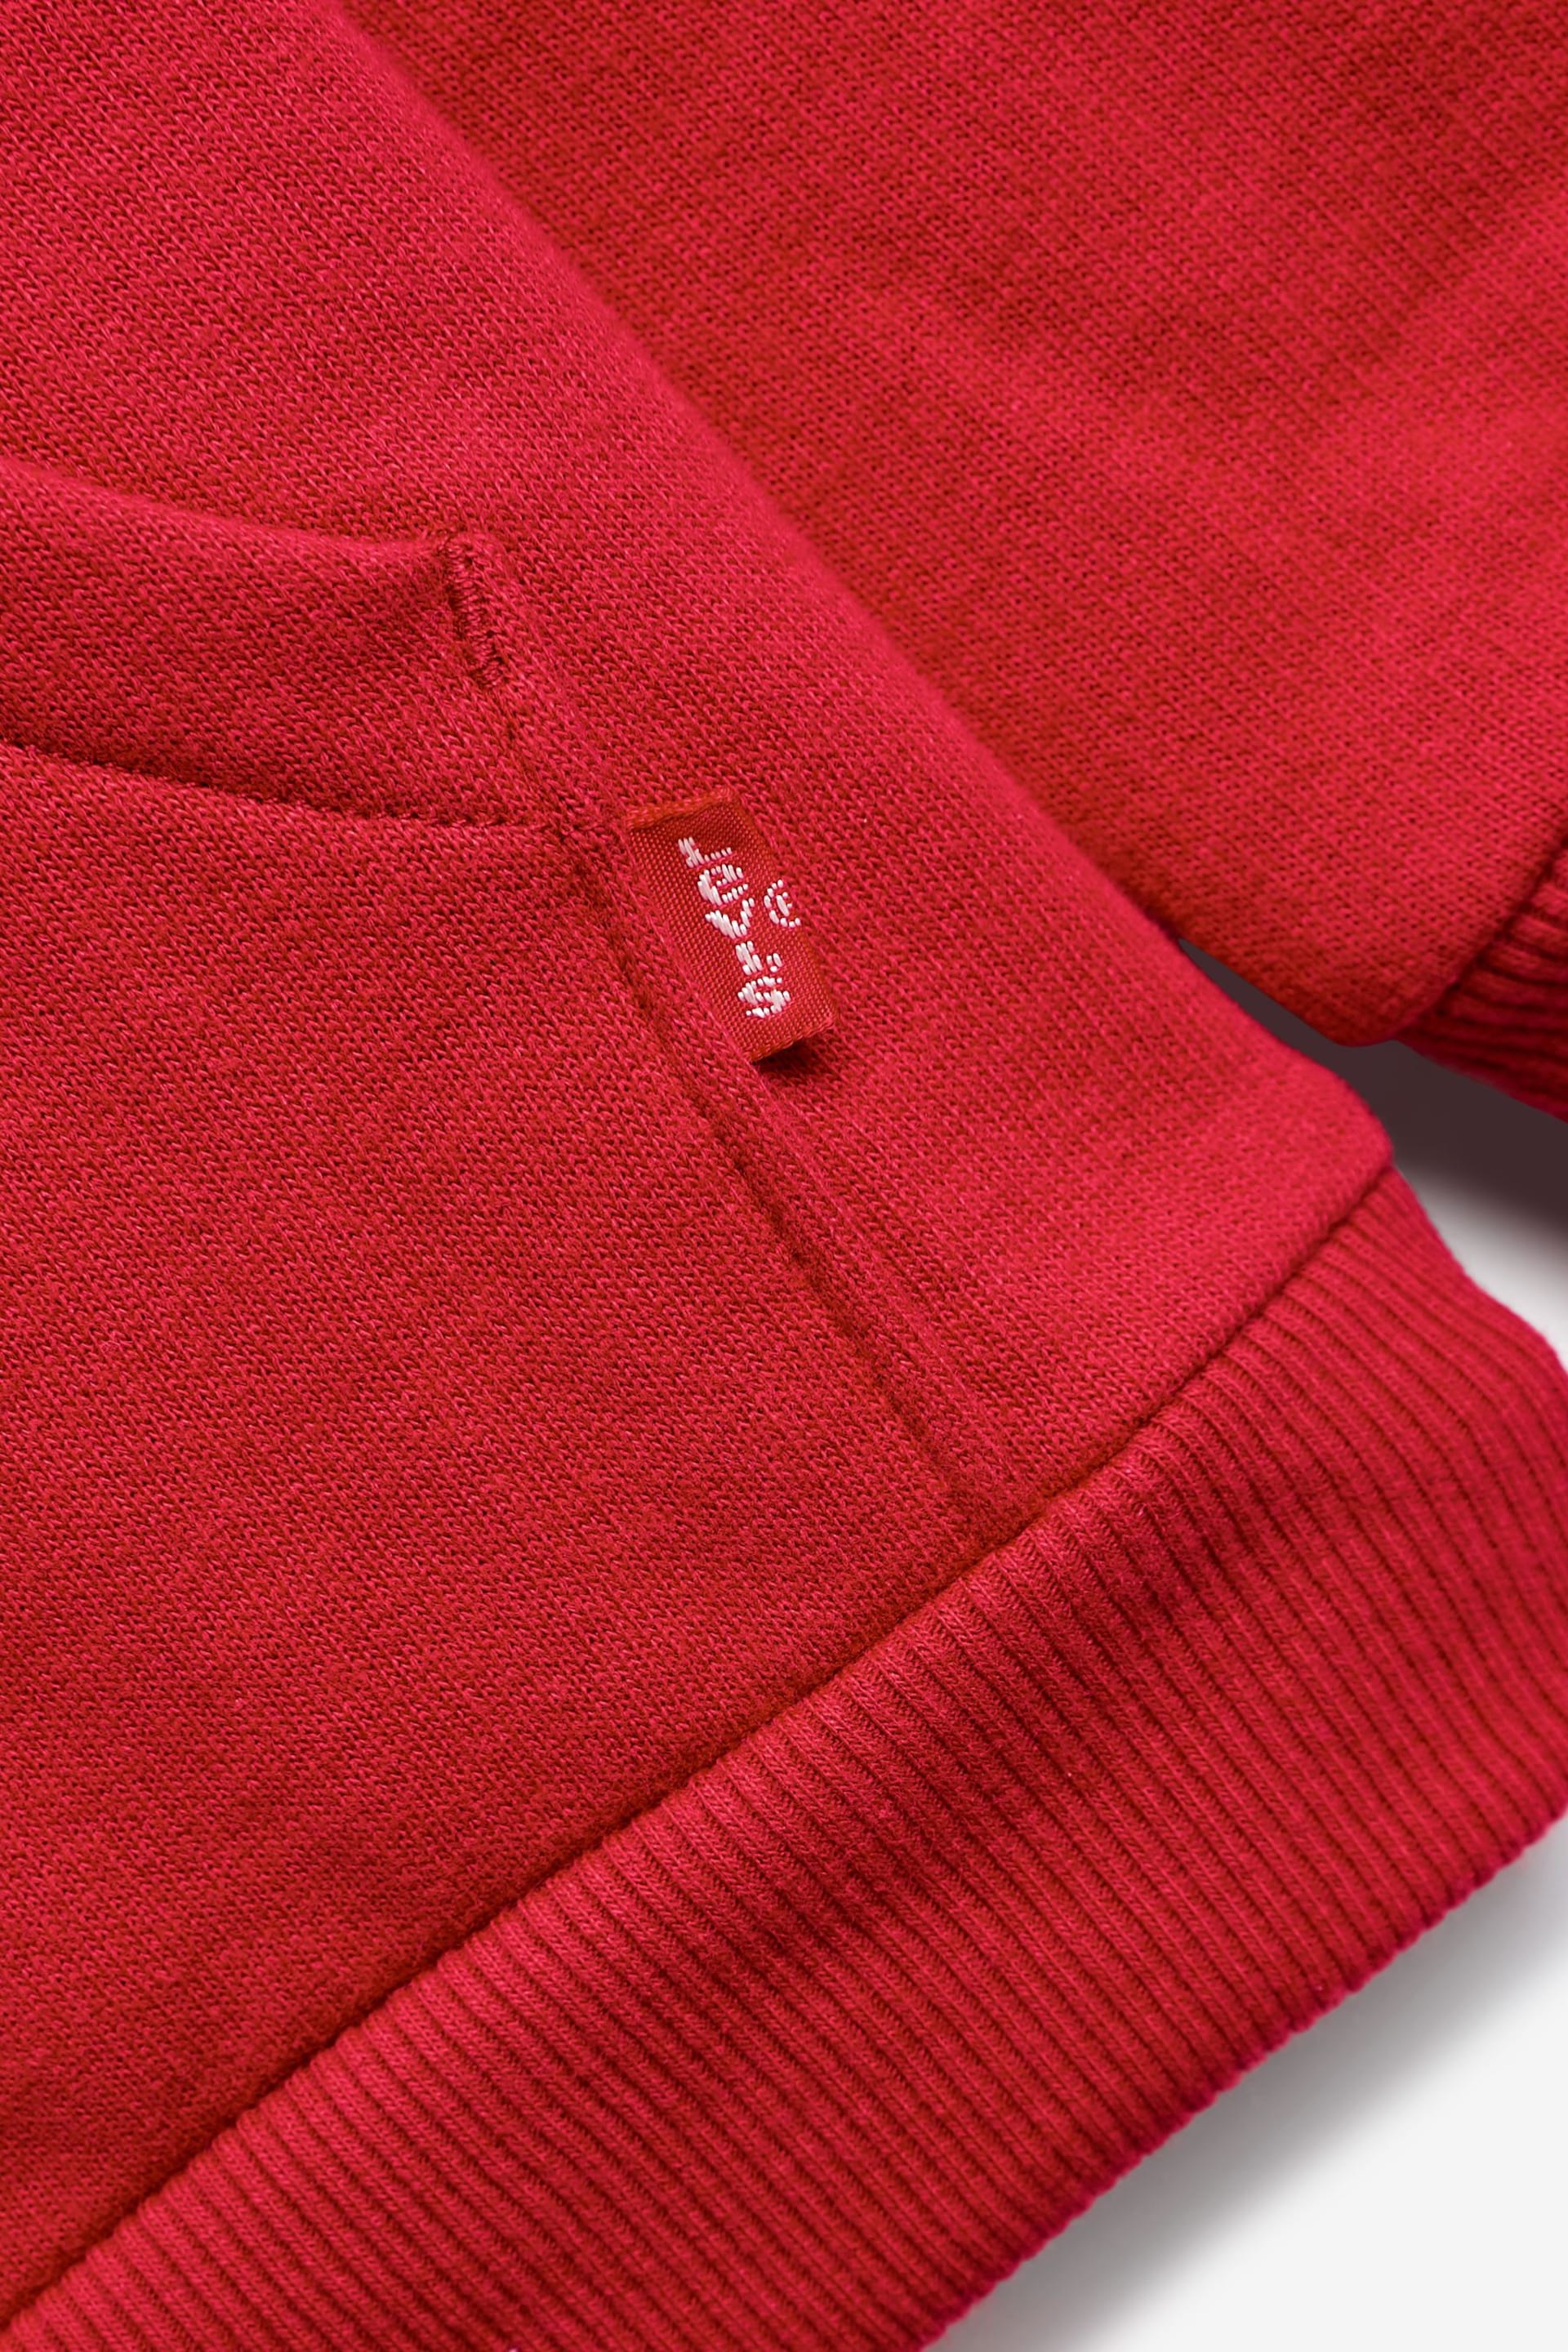 Levi's® Red Batwing Logo Hoodie - Image 8 of 8